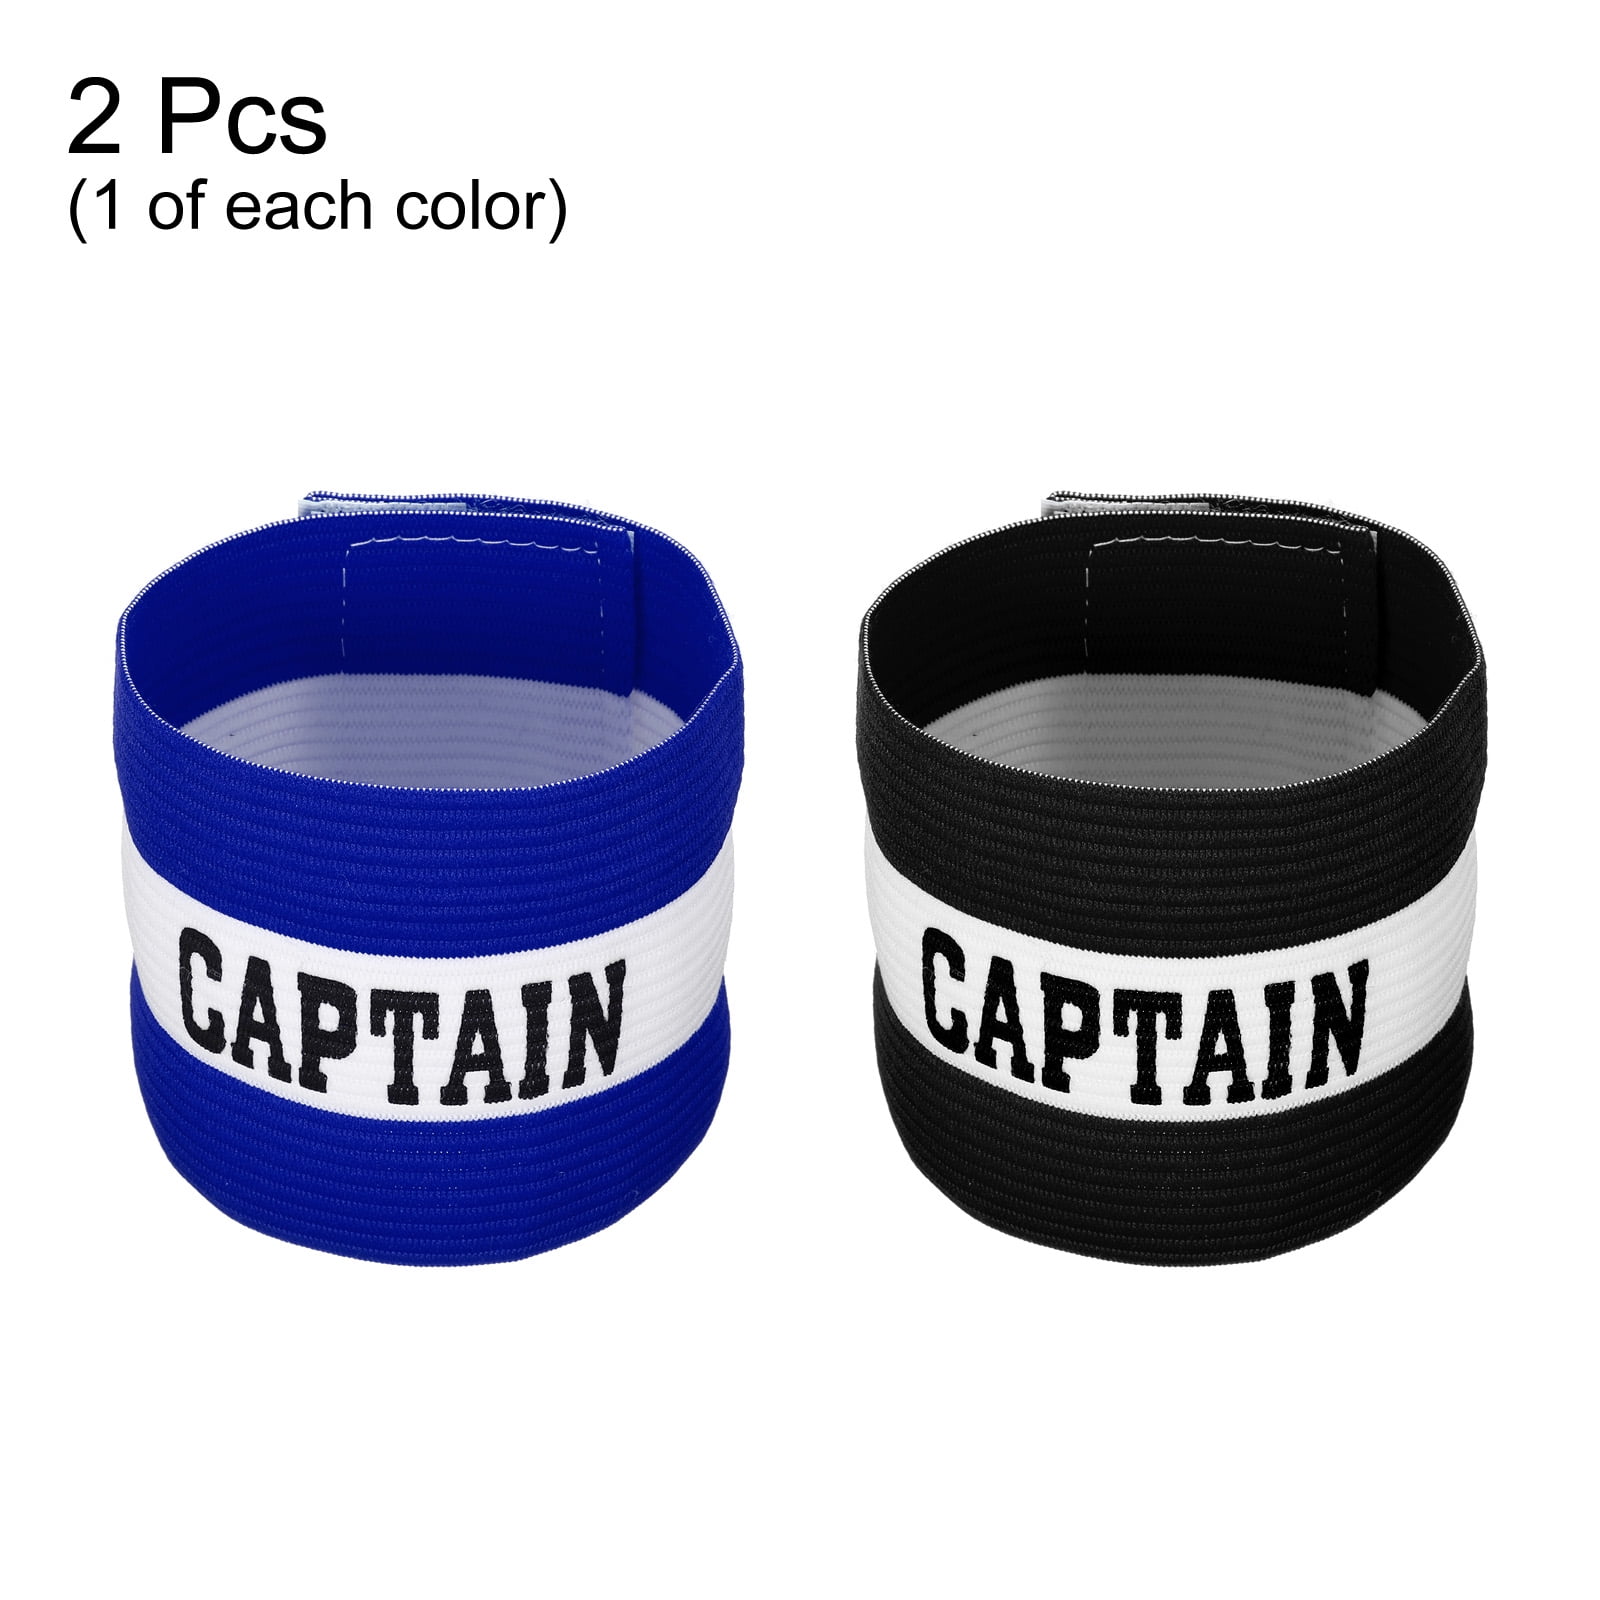 Bands Baseball Basketball Soccer Captain Armband Group Armband Captain  Armband Football Armband – the best products in the Joom Geek online store